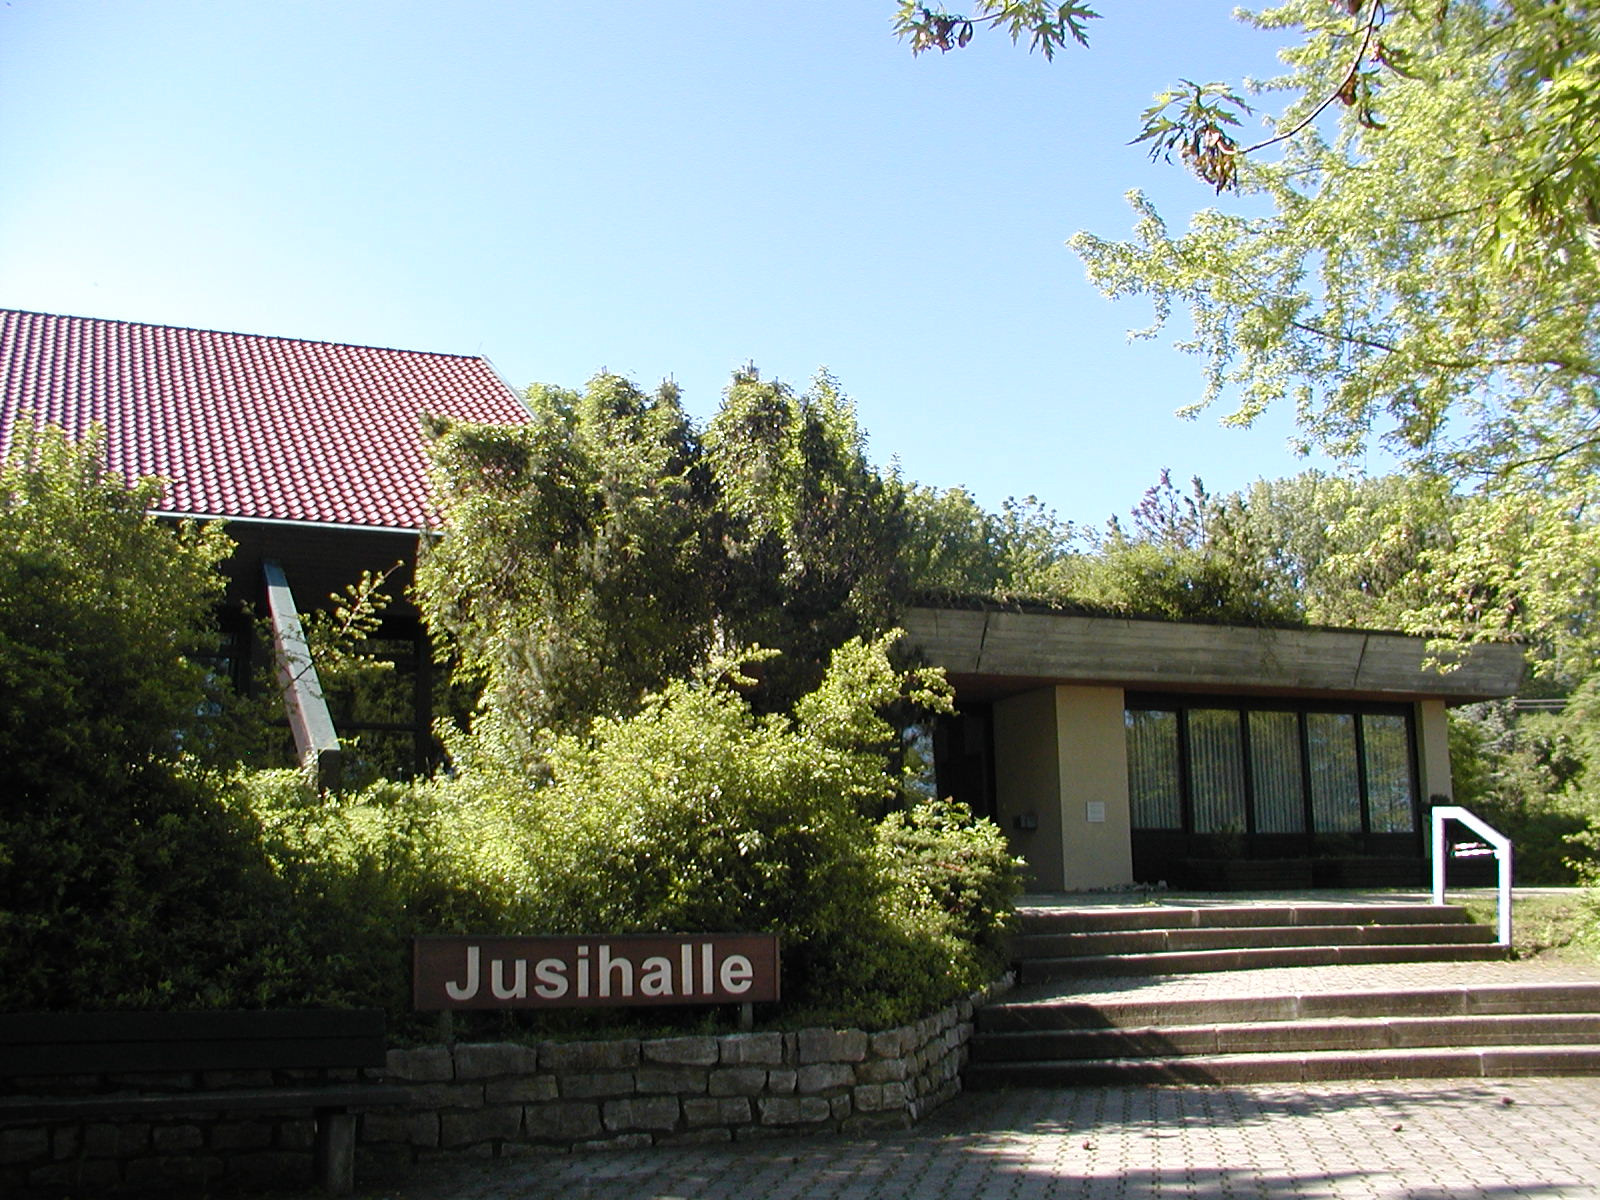  Jusihalle 